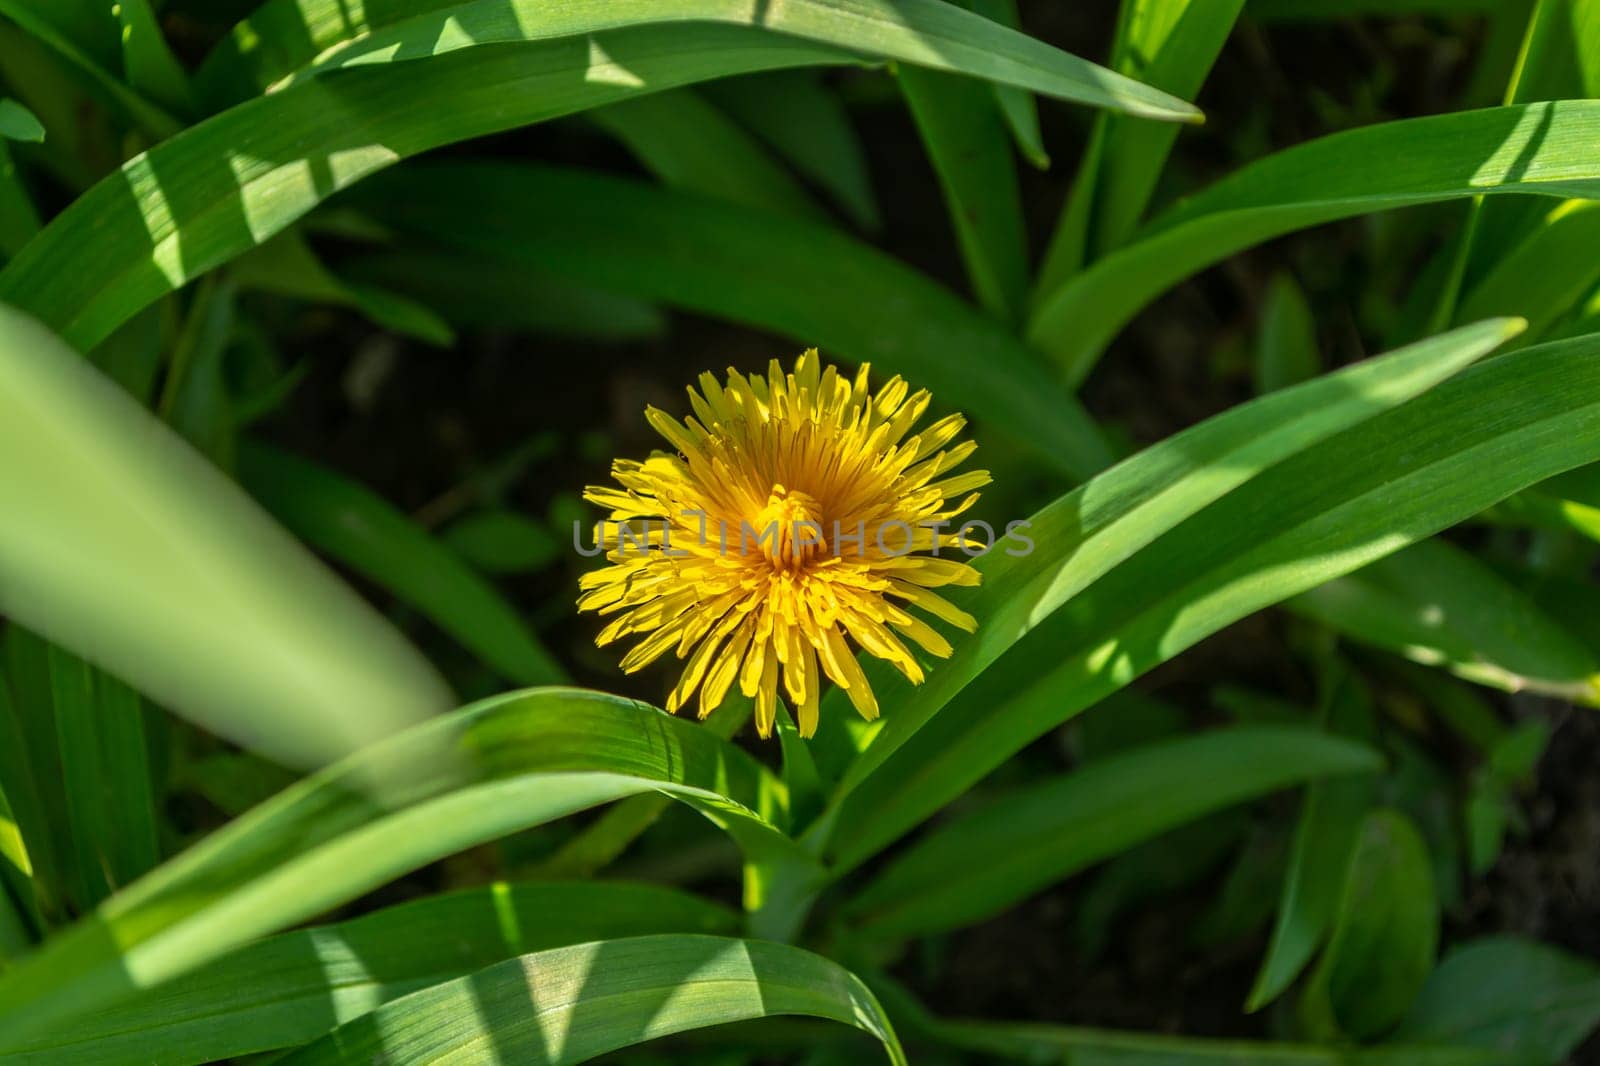 One yellow blooming dandelion among the green grass. Spring theme.